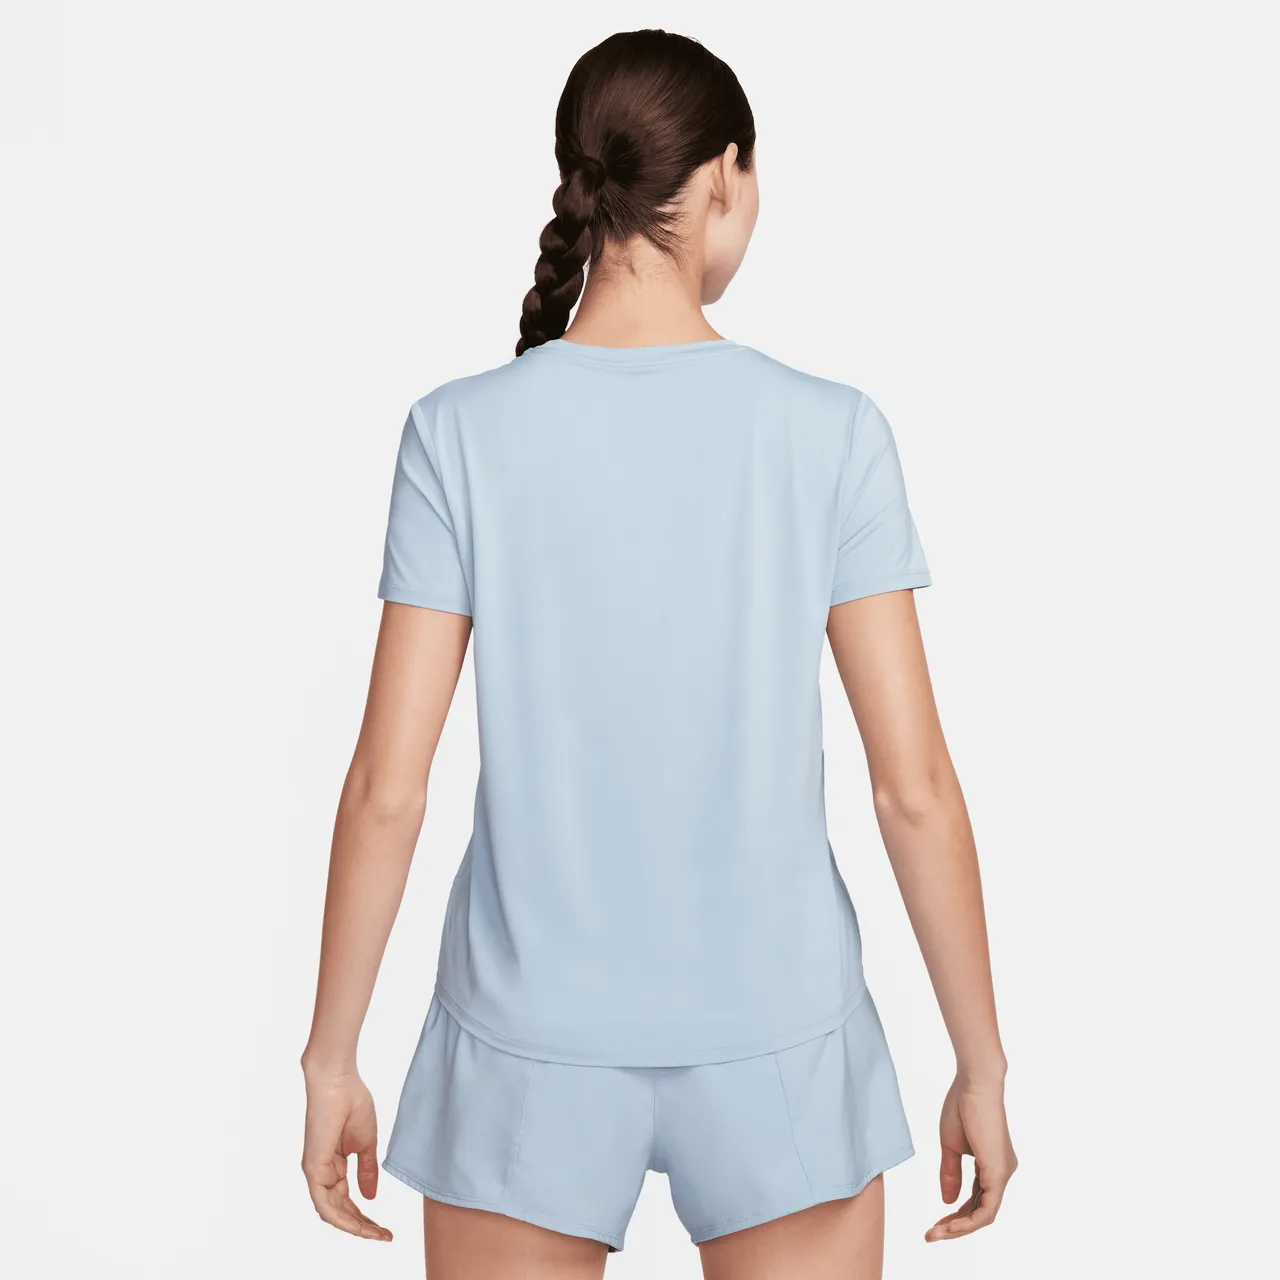 Nike One Classic Women's Dri-FIT Short-Sleeve Top - Blue - Polyester